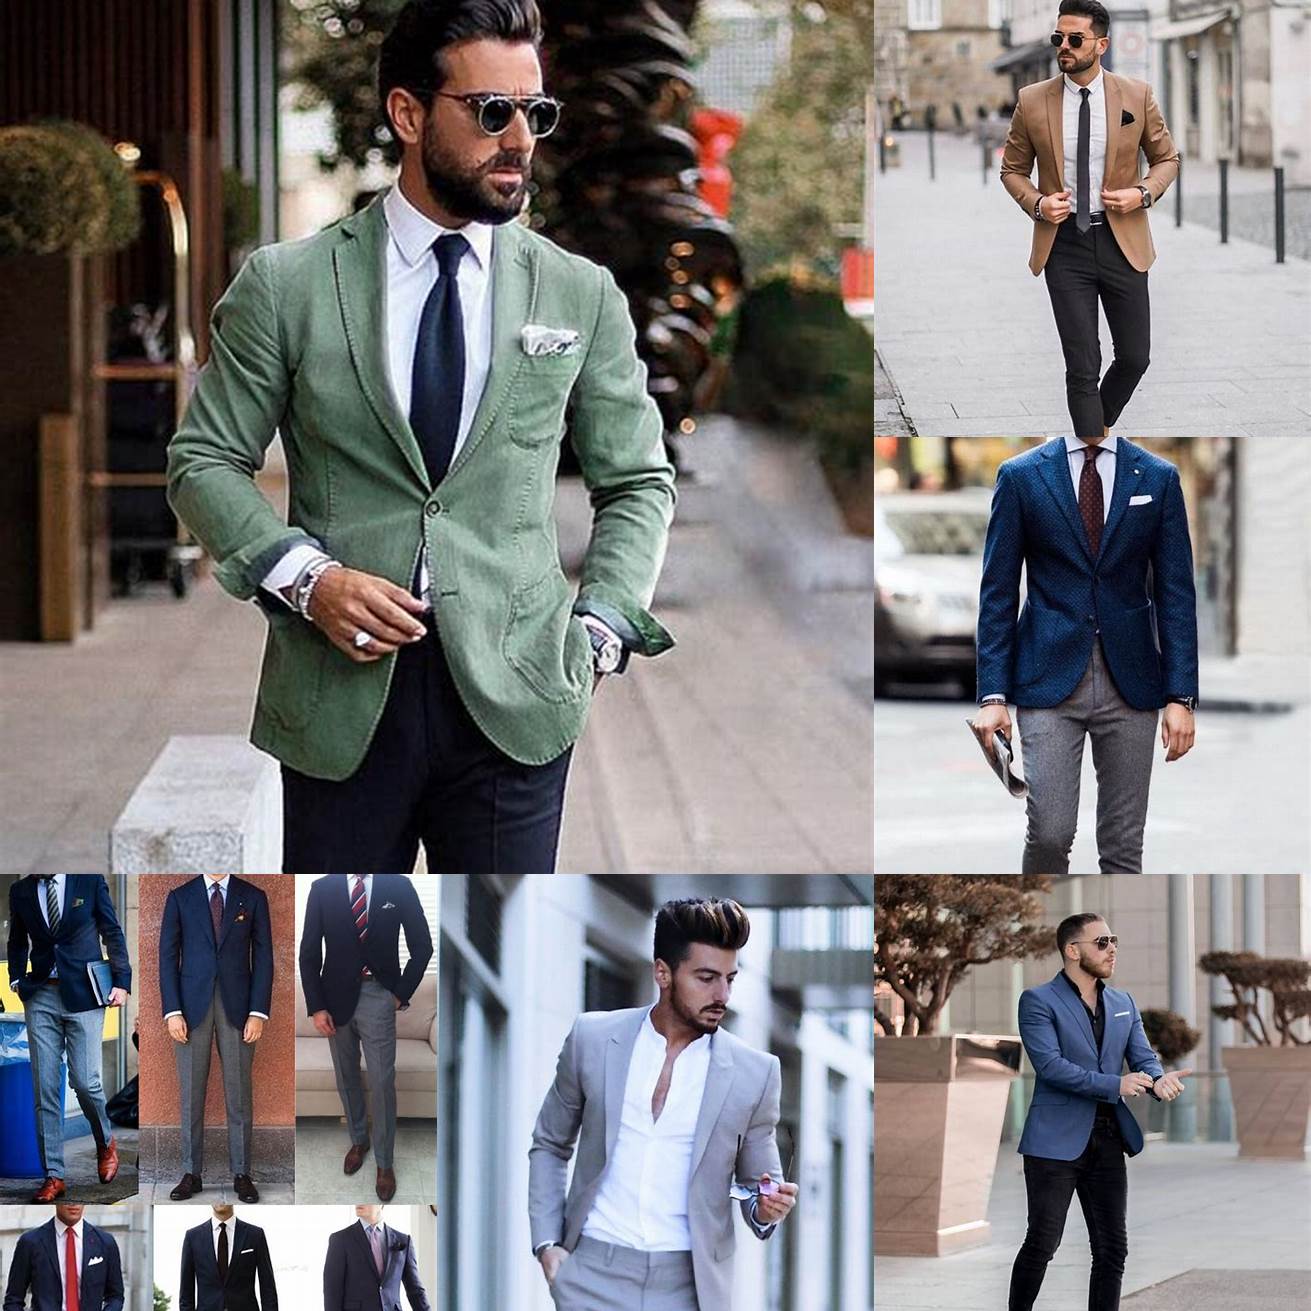 Dress them up with a blazer and trousers for a formal event